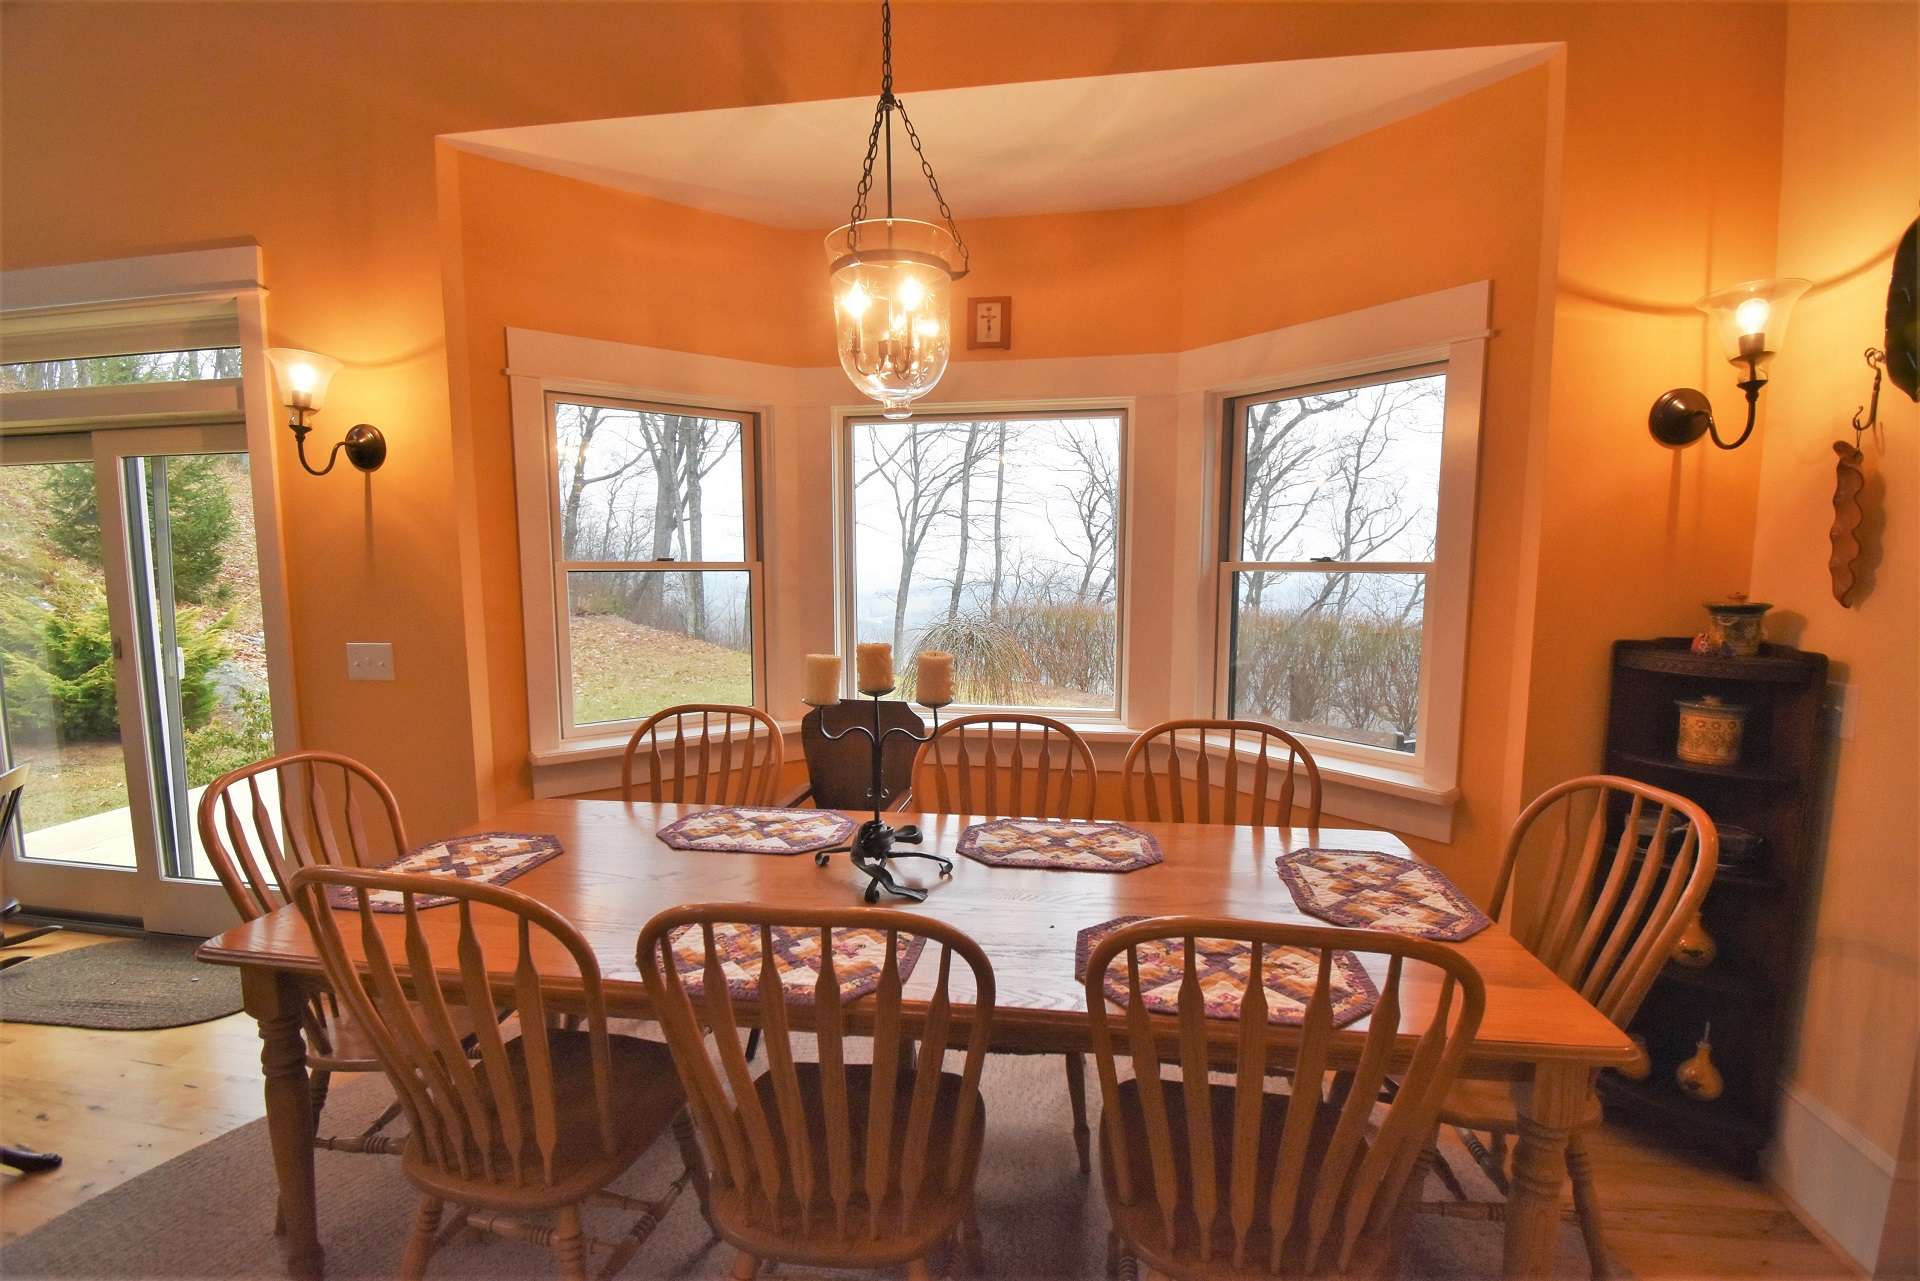 You and your dinner guests will enjoy the views while dining indoors.